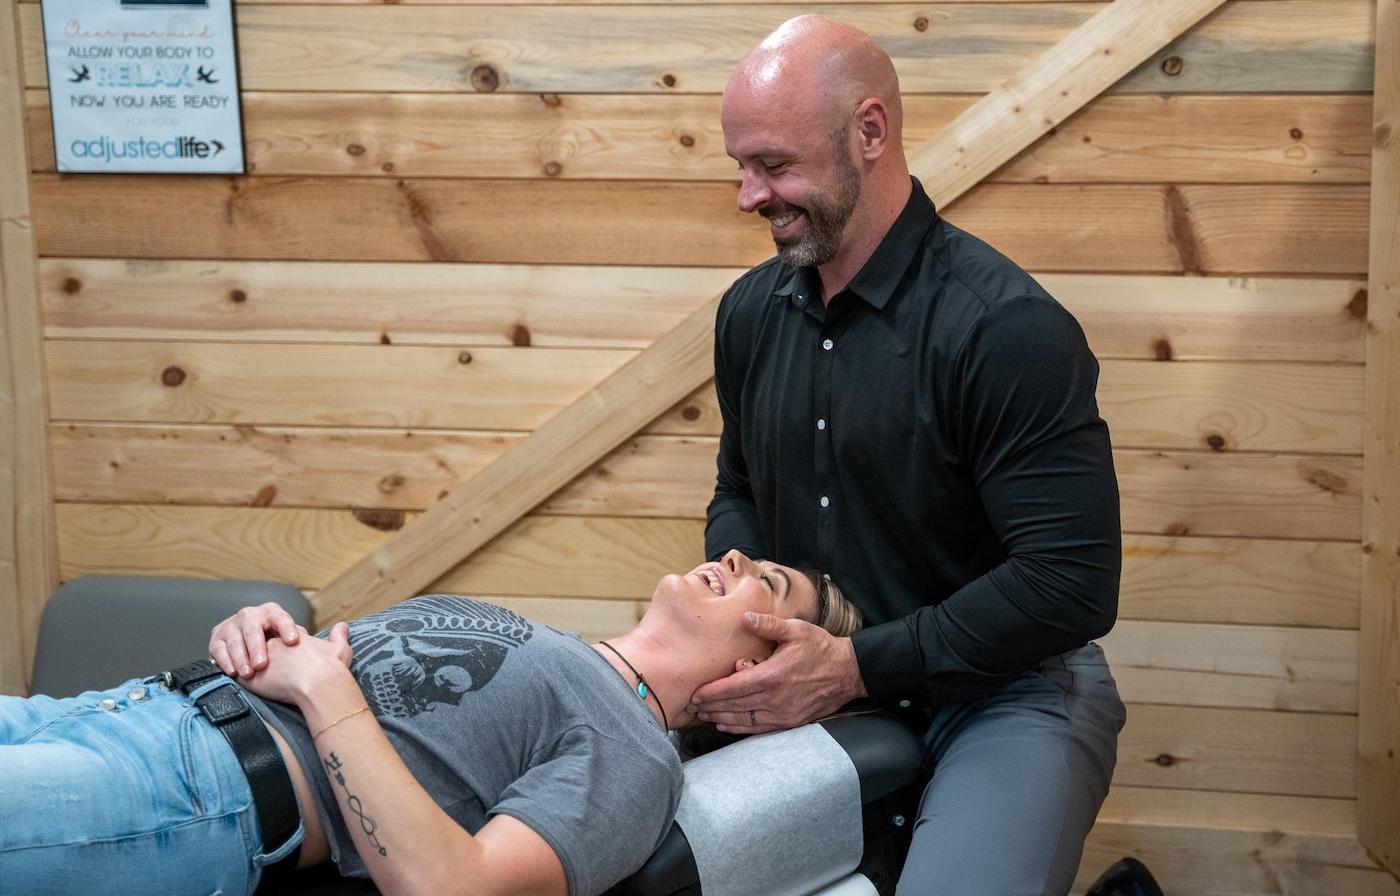 Dr. Coty Spraggs treating a woman's whiplash injury pain with chiropractic adjustment